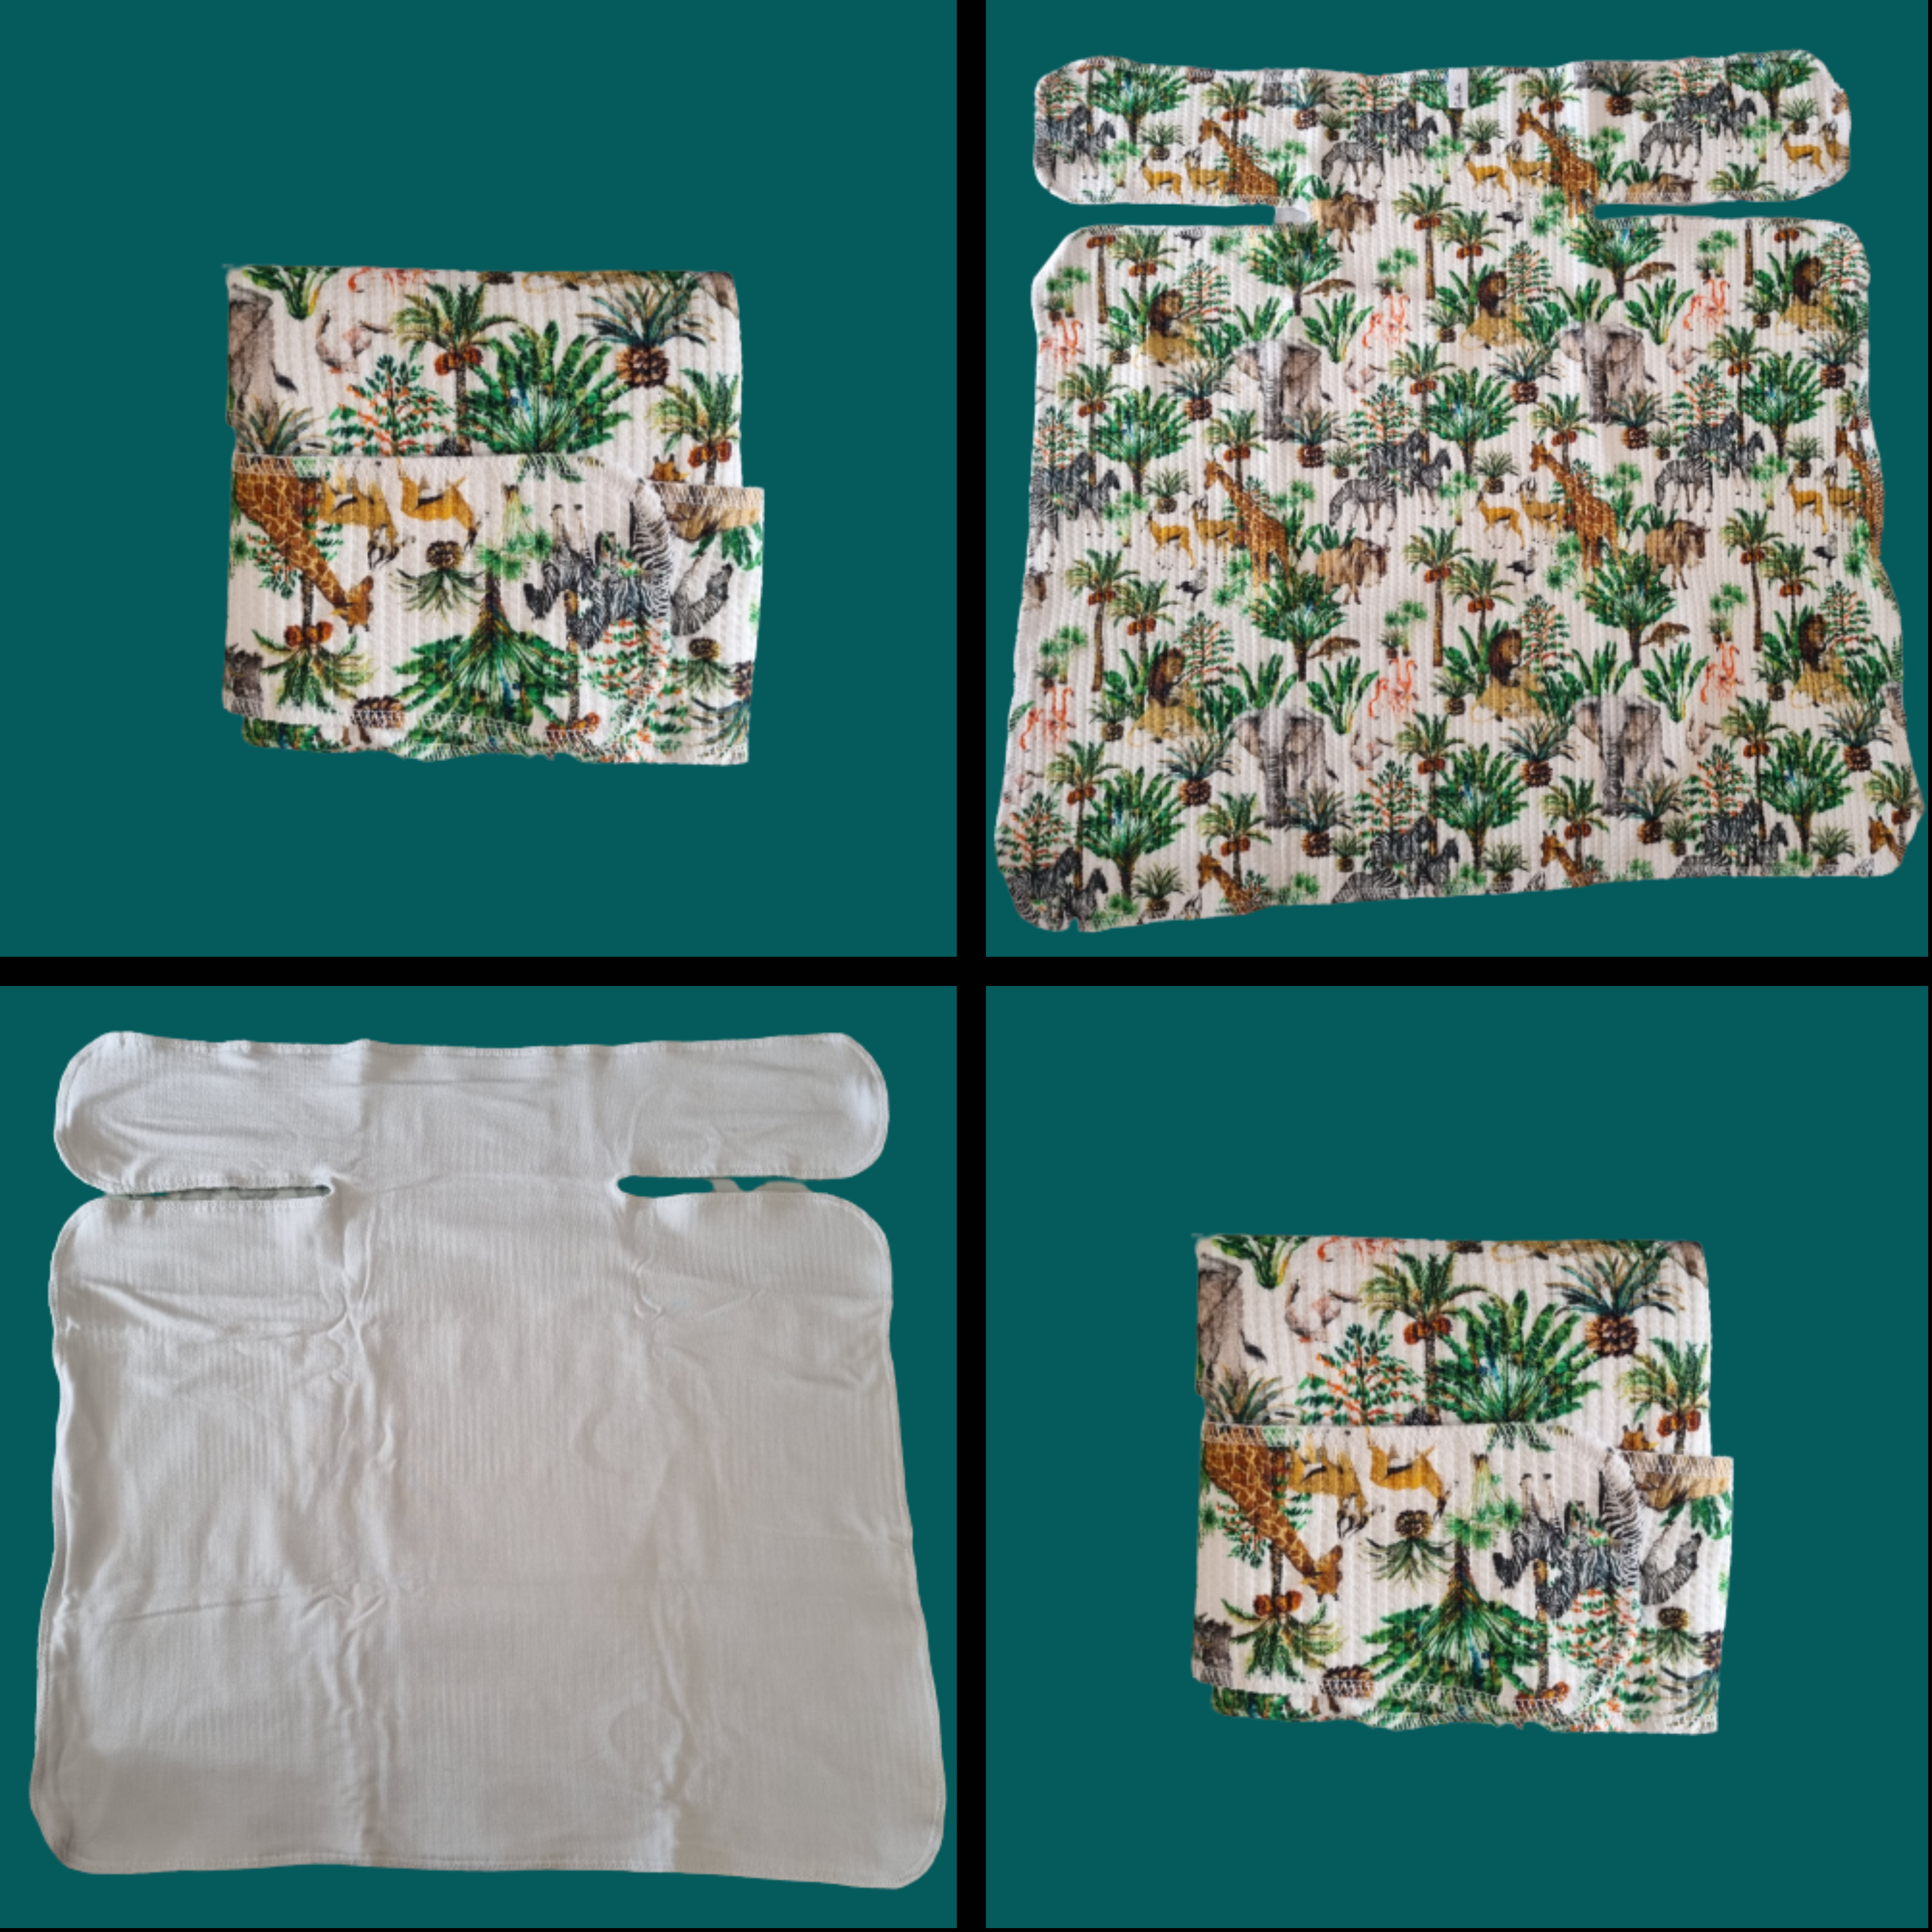 collage of preflat nappies with pattern of jungle animals